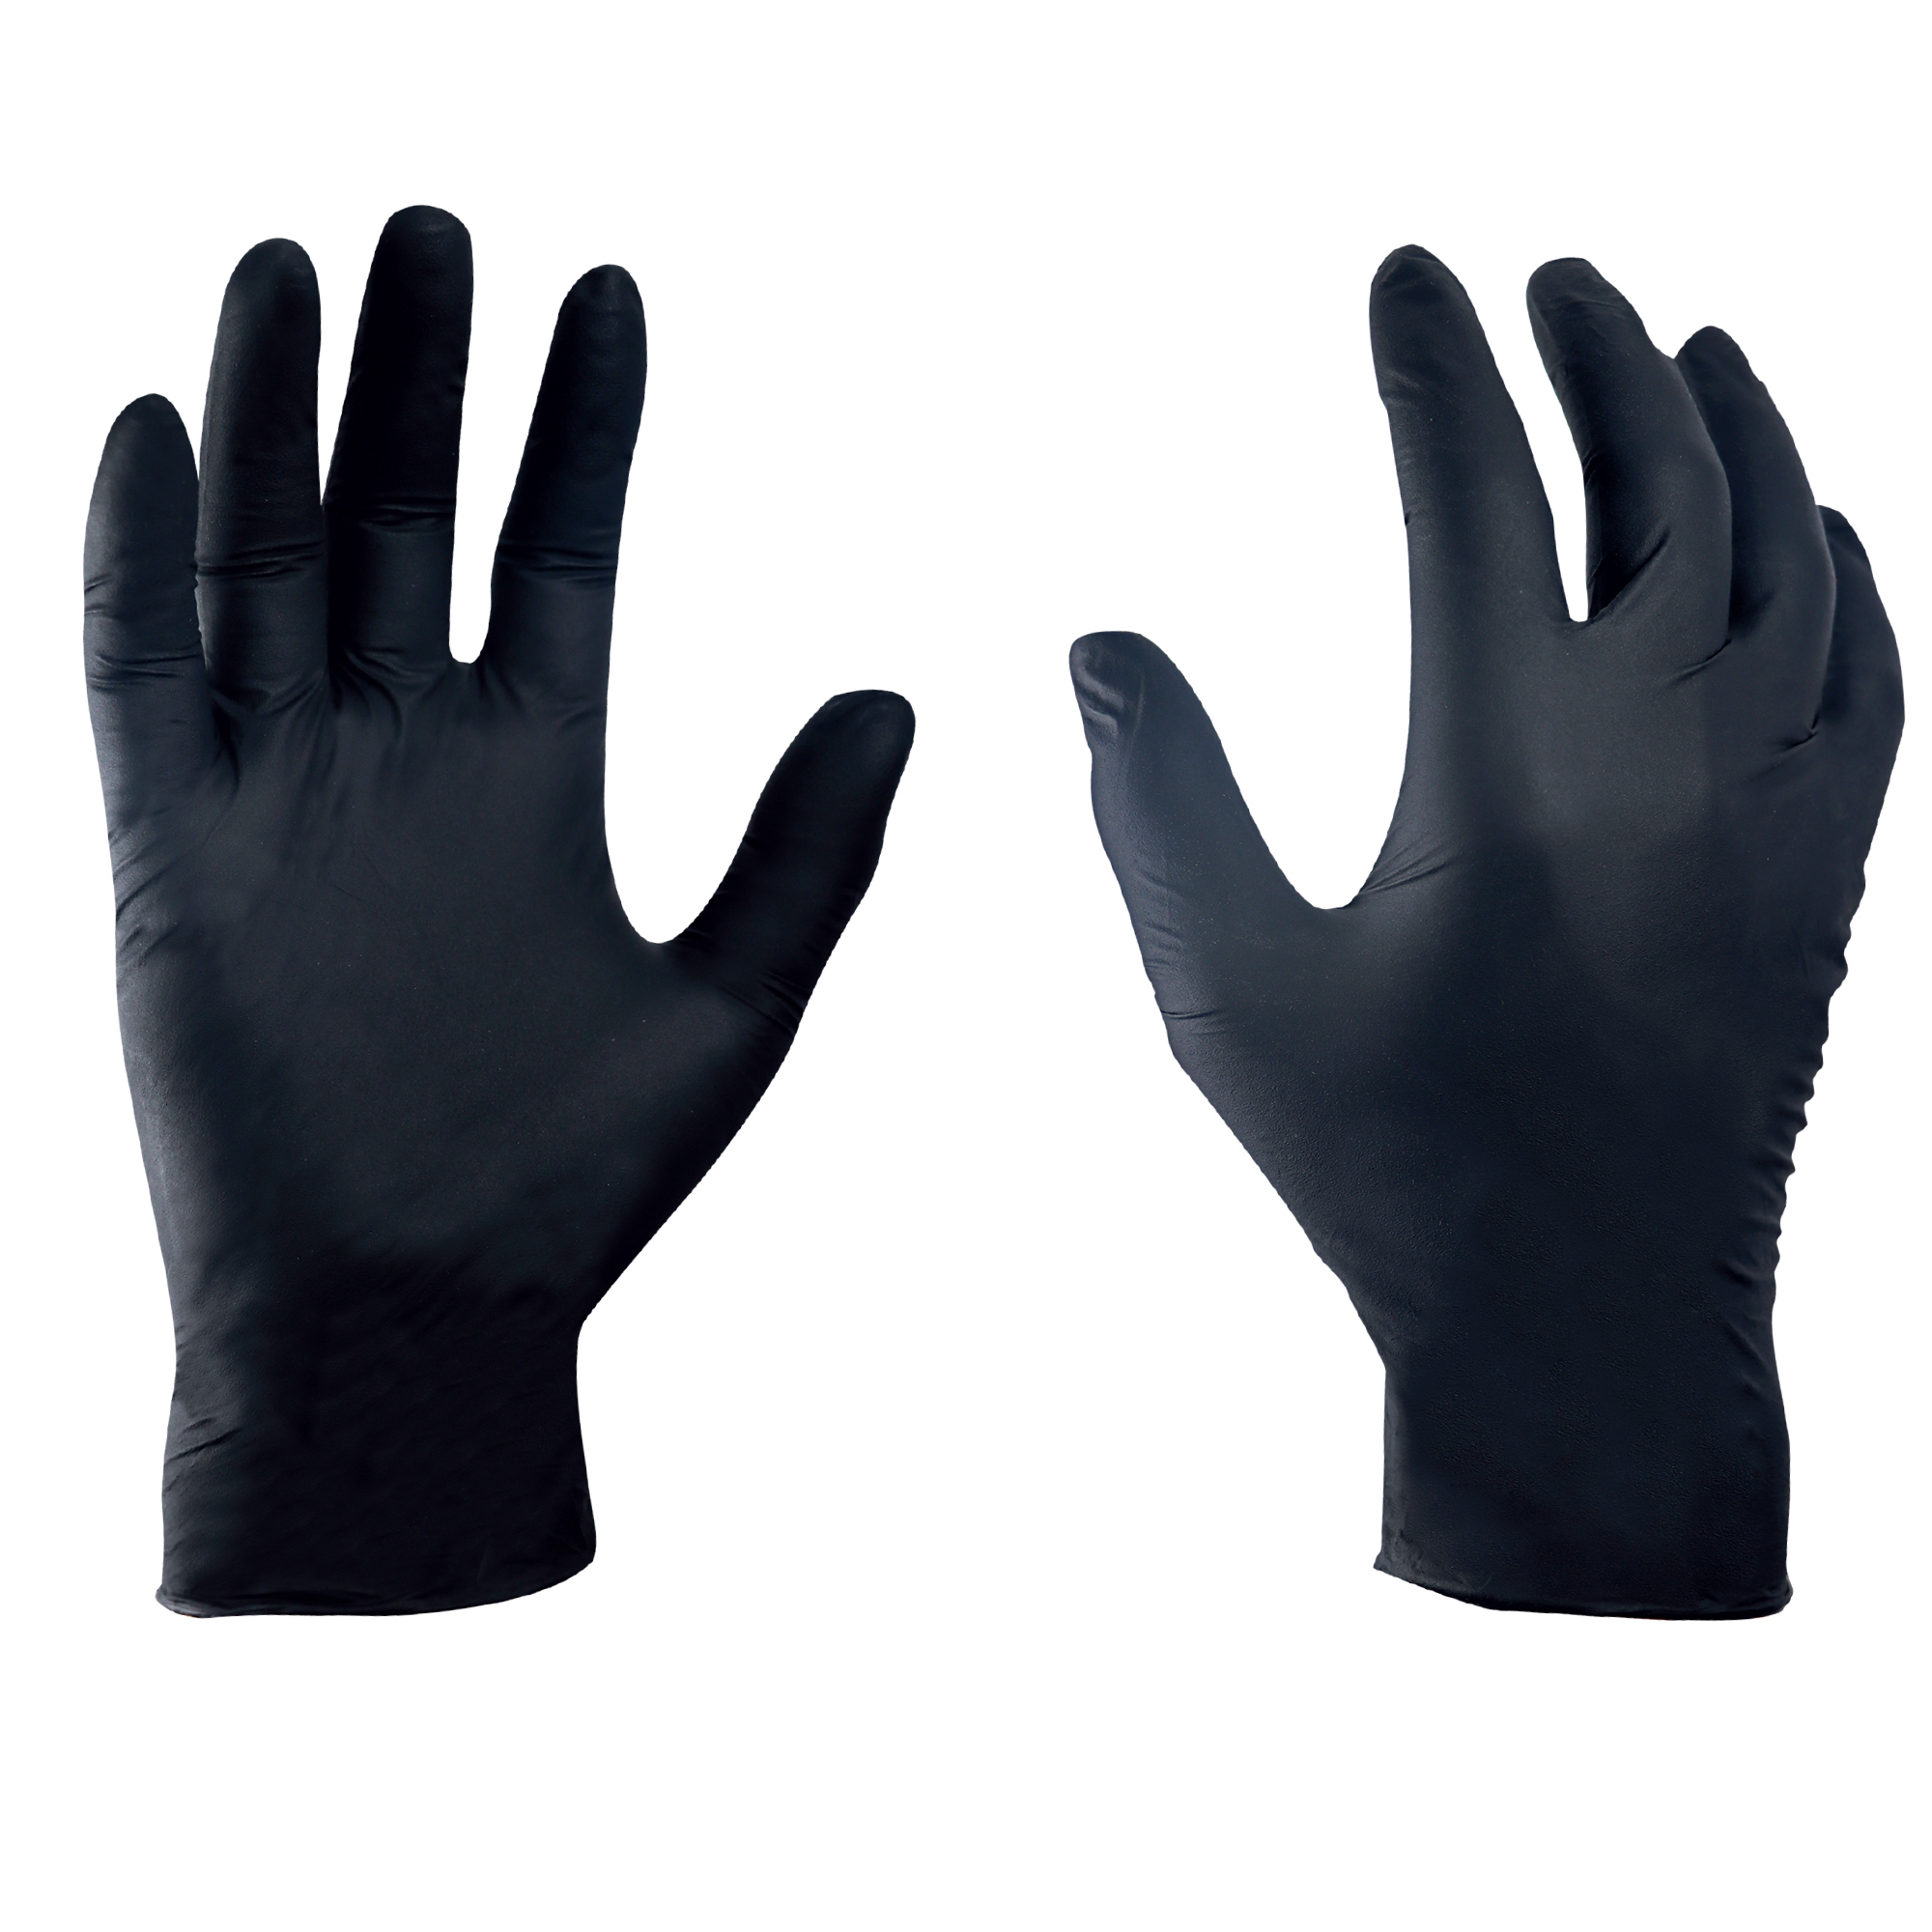 General Electric, 4mil Nitrile Black Small Gloves 100pk, Size S, Color Black, Included (qty.) 100 Model GG601S